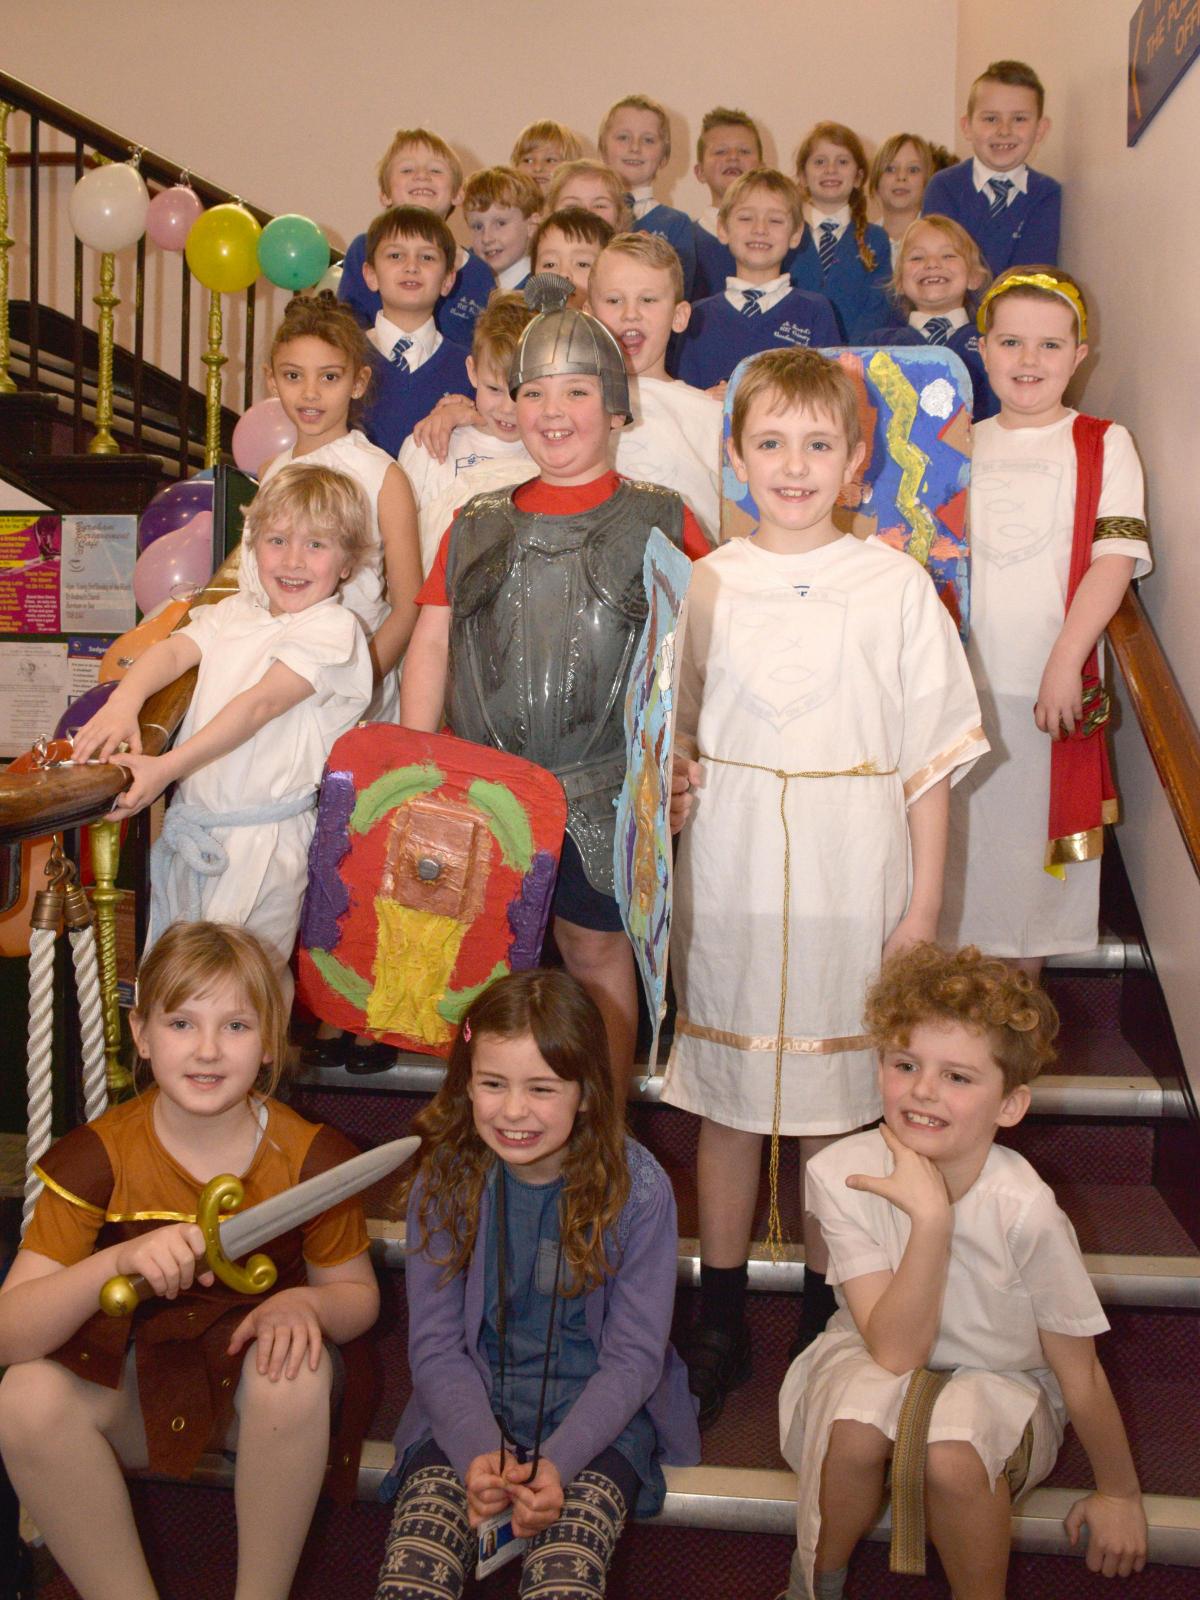 DRESSED UP: Students from St Josephs School dressed up as Roman gladiators